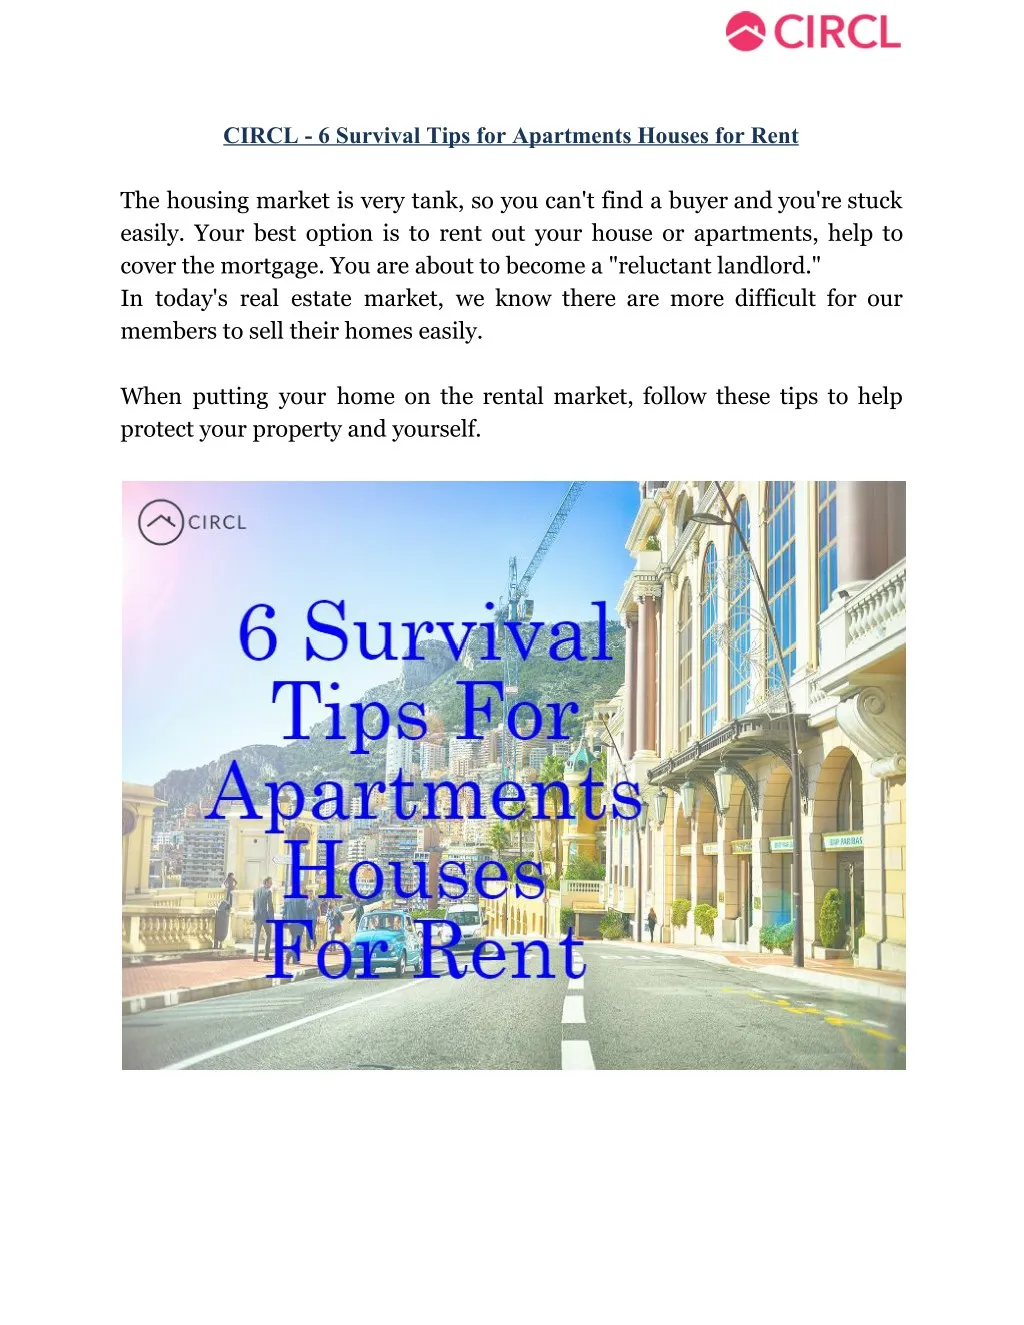 circl 6 survival tips for apartments houses